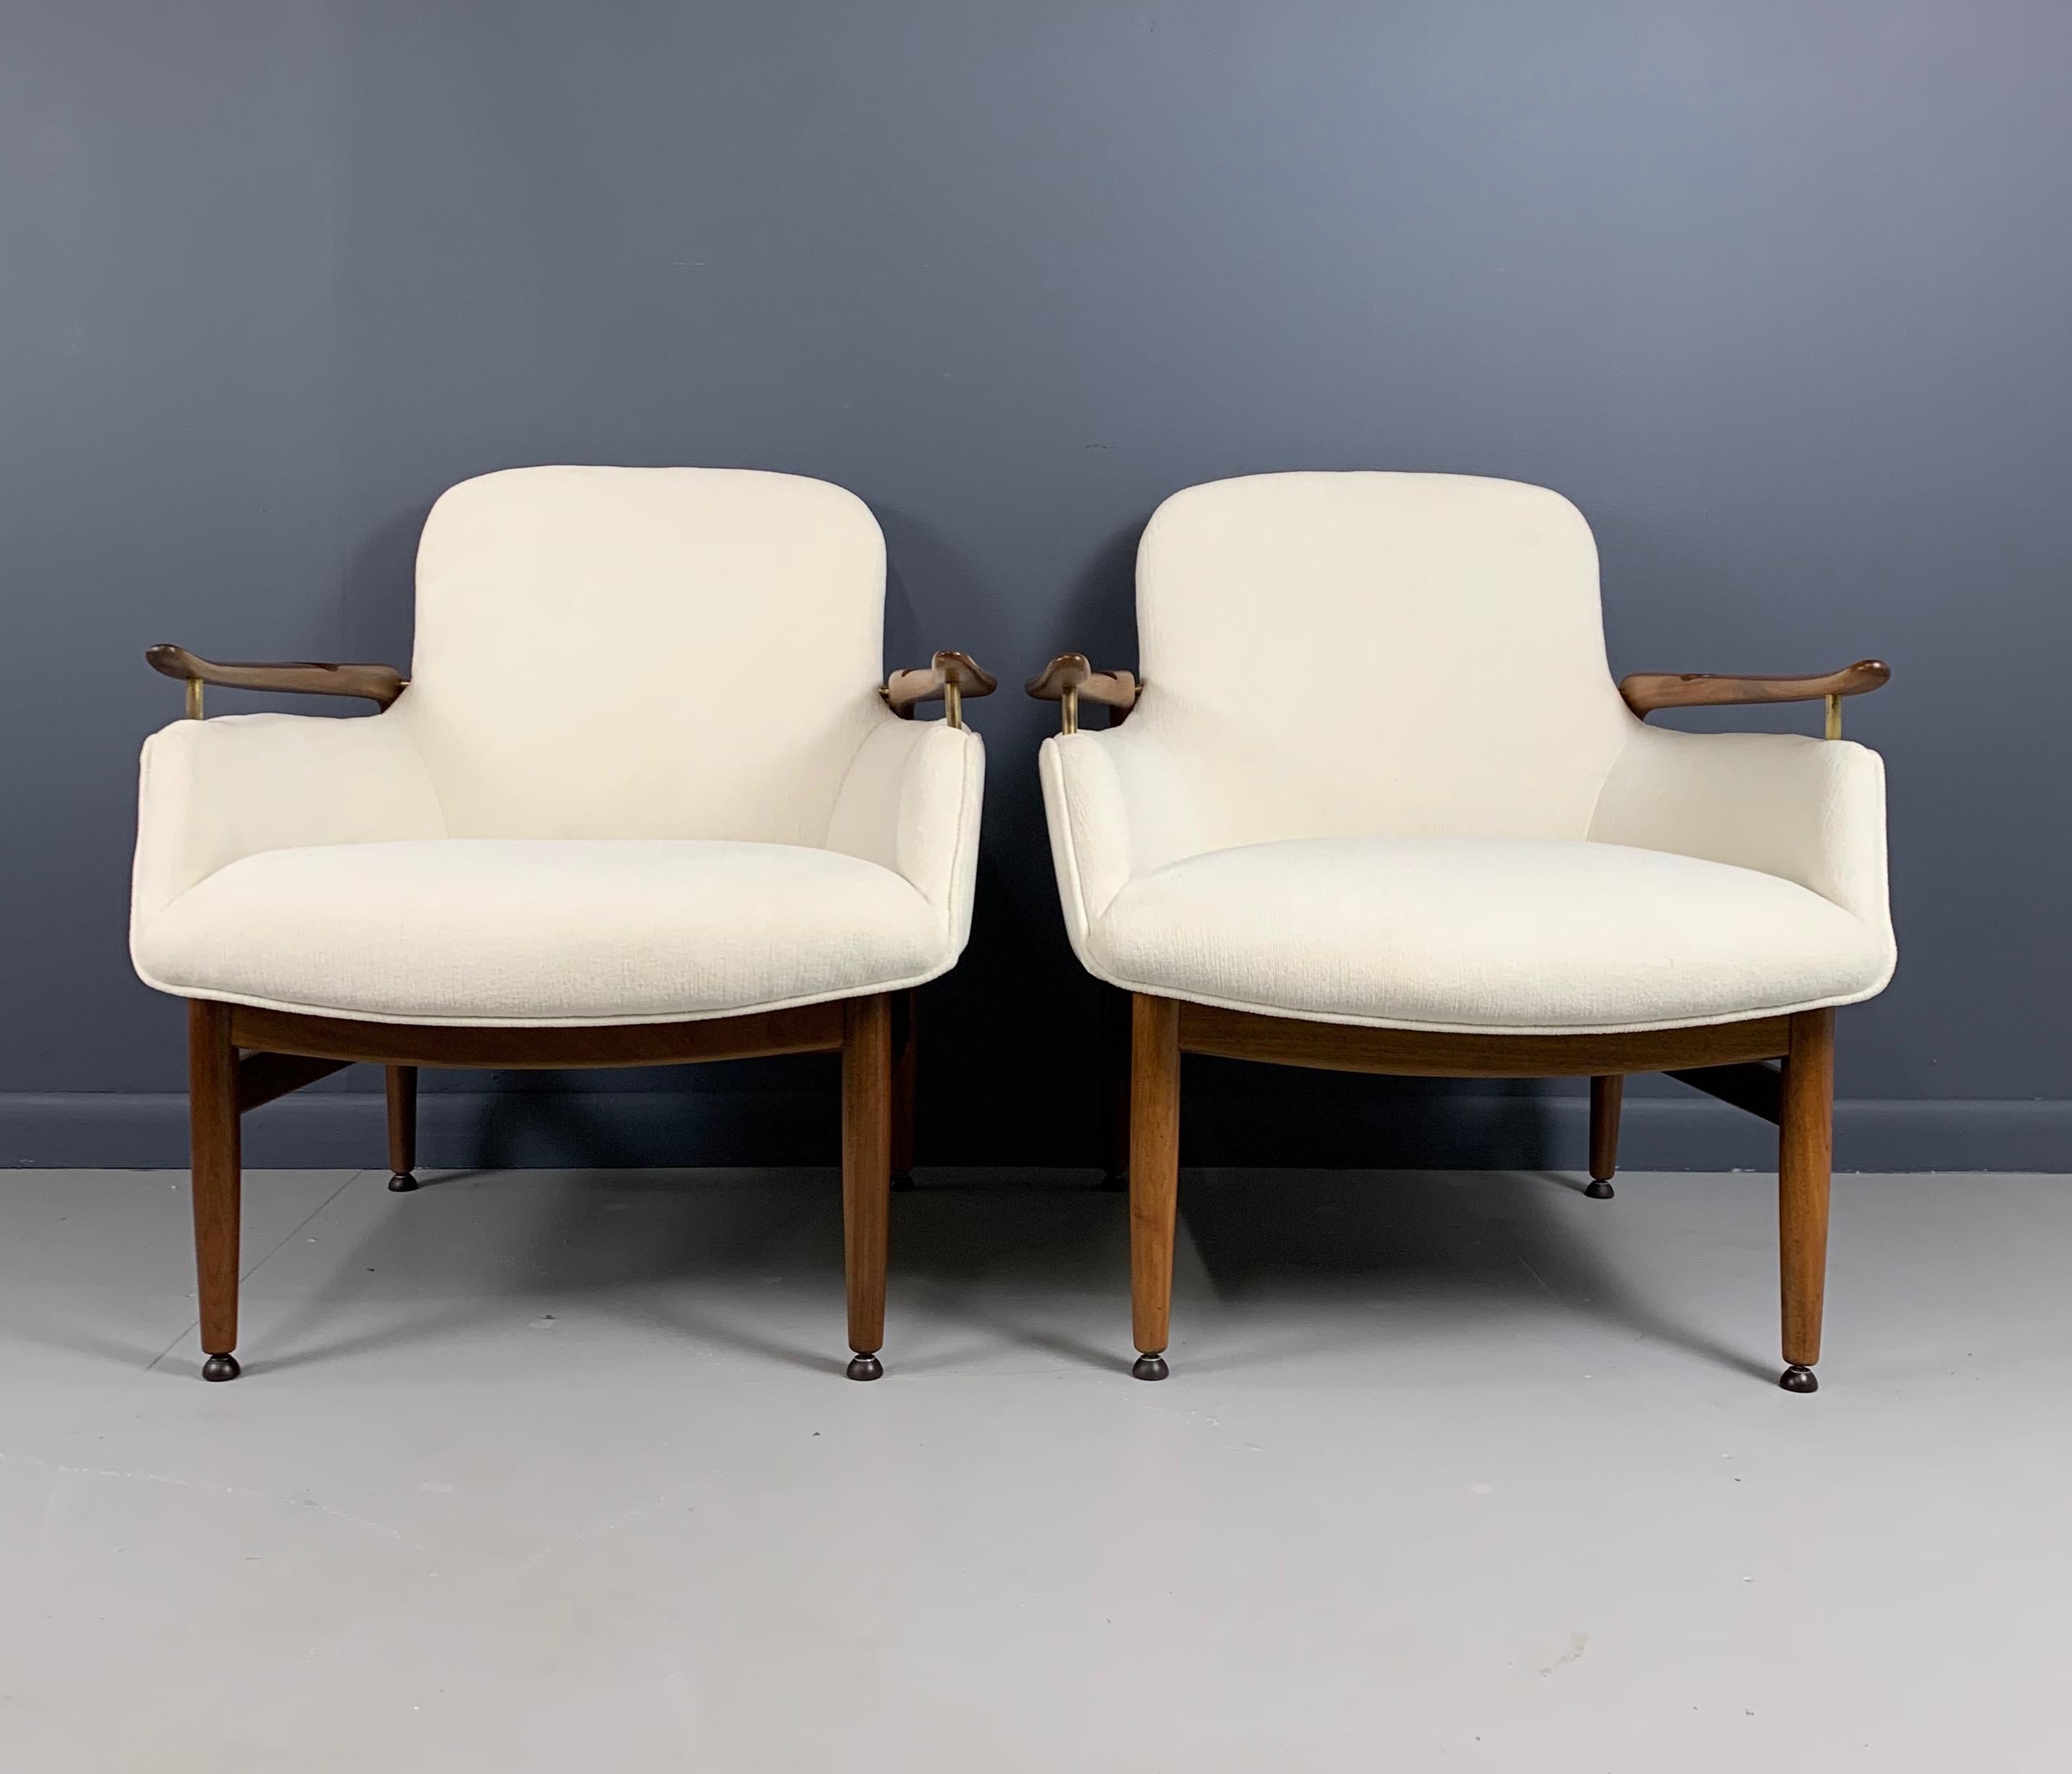 Pair of Finn Juhl NV53 easy chairs with floating armrests, mounted with brass fittings. Re-upholstered with white textured velvet and a complete restoration. Designed, 1953.

Finn Juhl worked in that magical period of mid century masters that